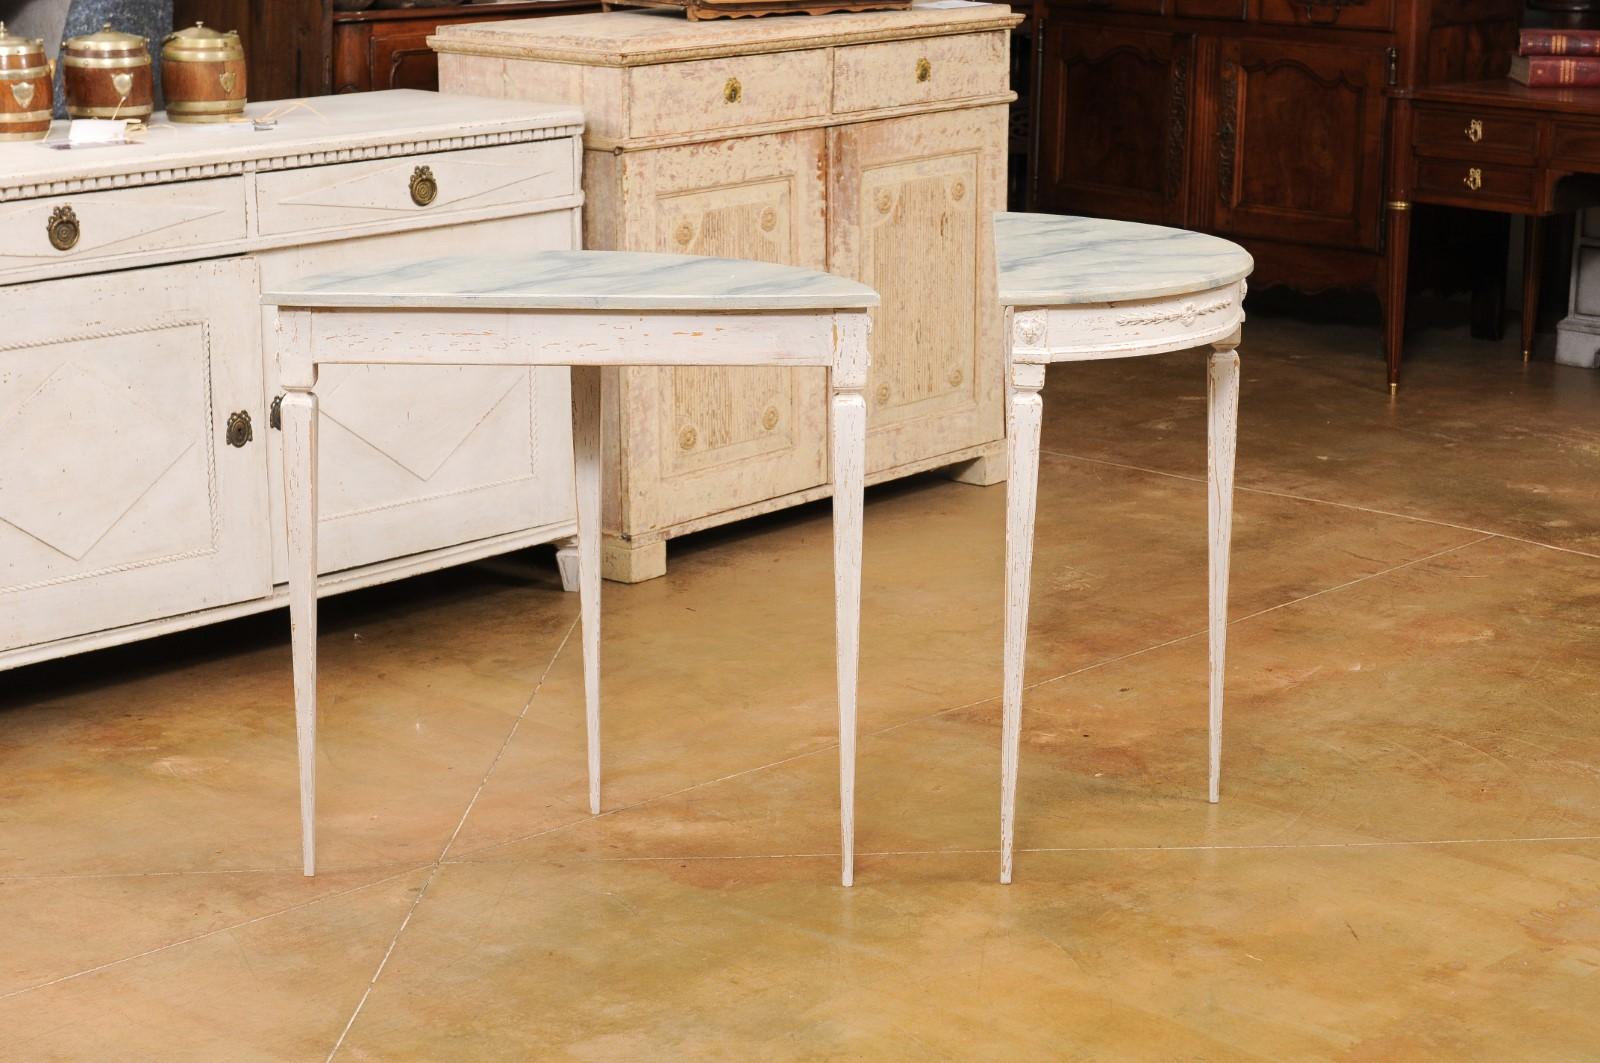 Pair of Swedish 1920s Gustavian Style Painted Demilune Tables with Carved Aprons For Sale 2